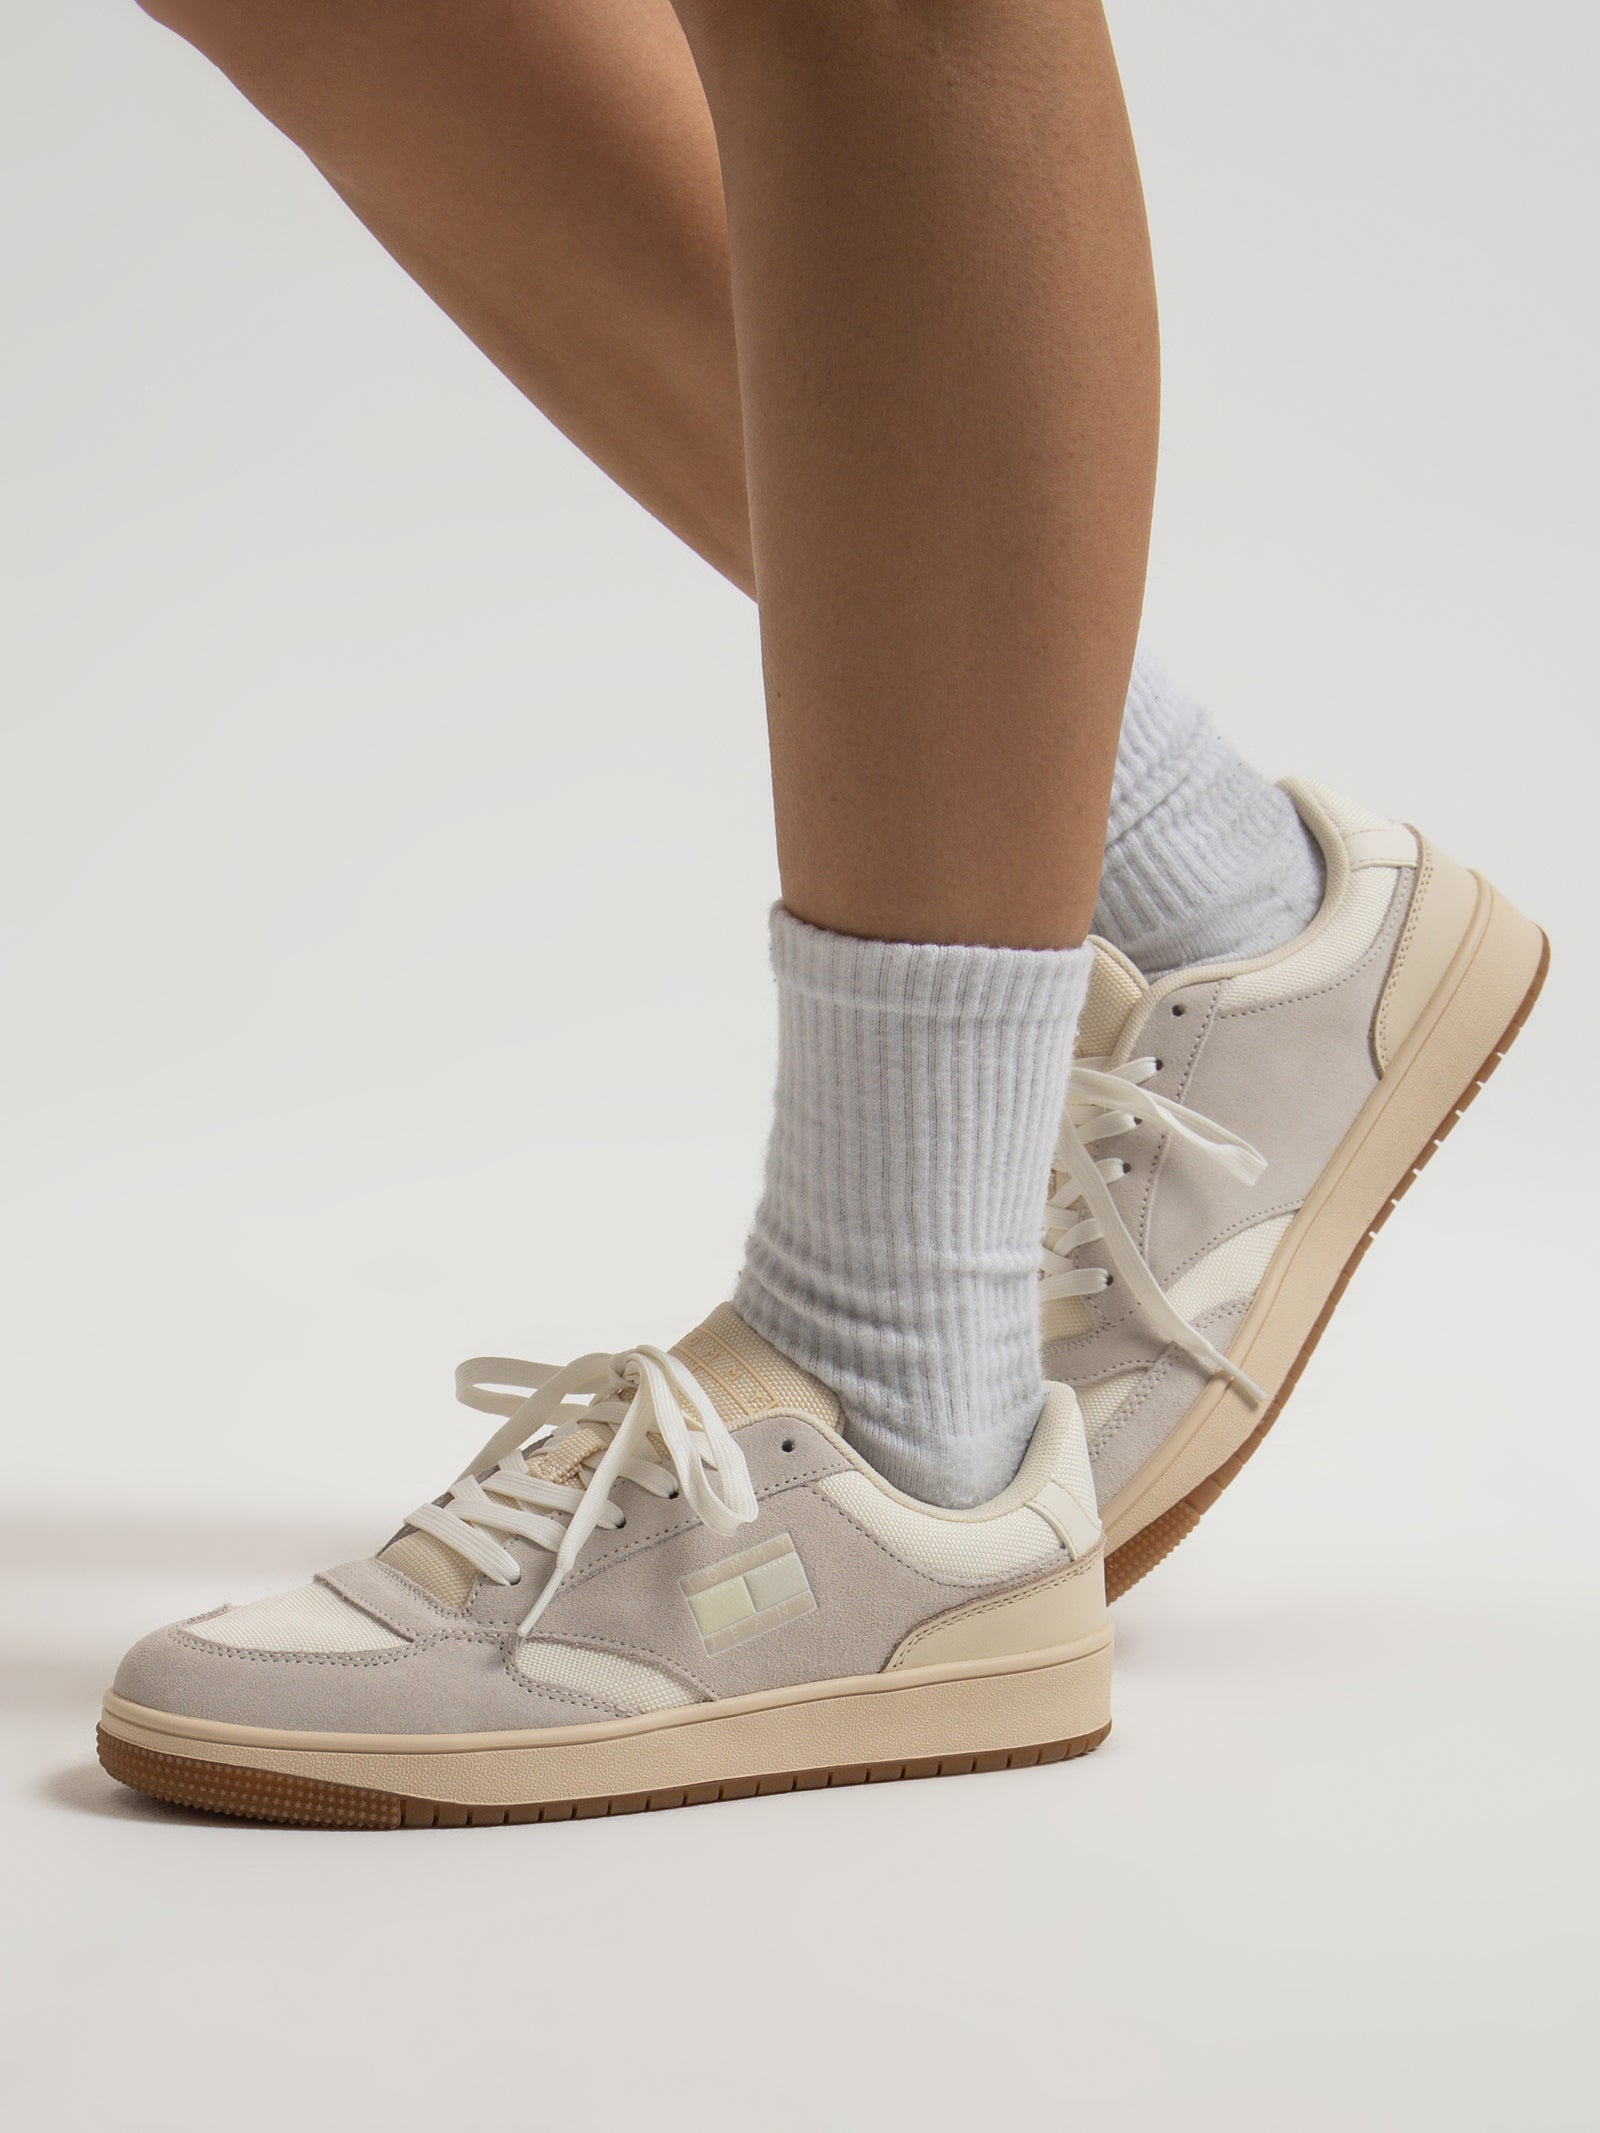 Womens Retro Mixed Texture Trainers in Cream